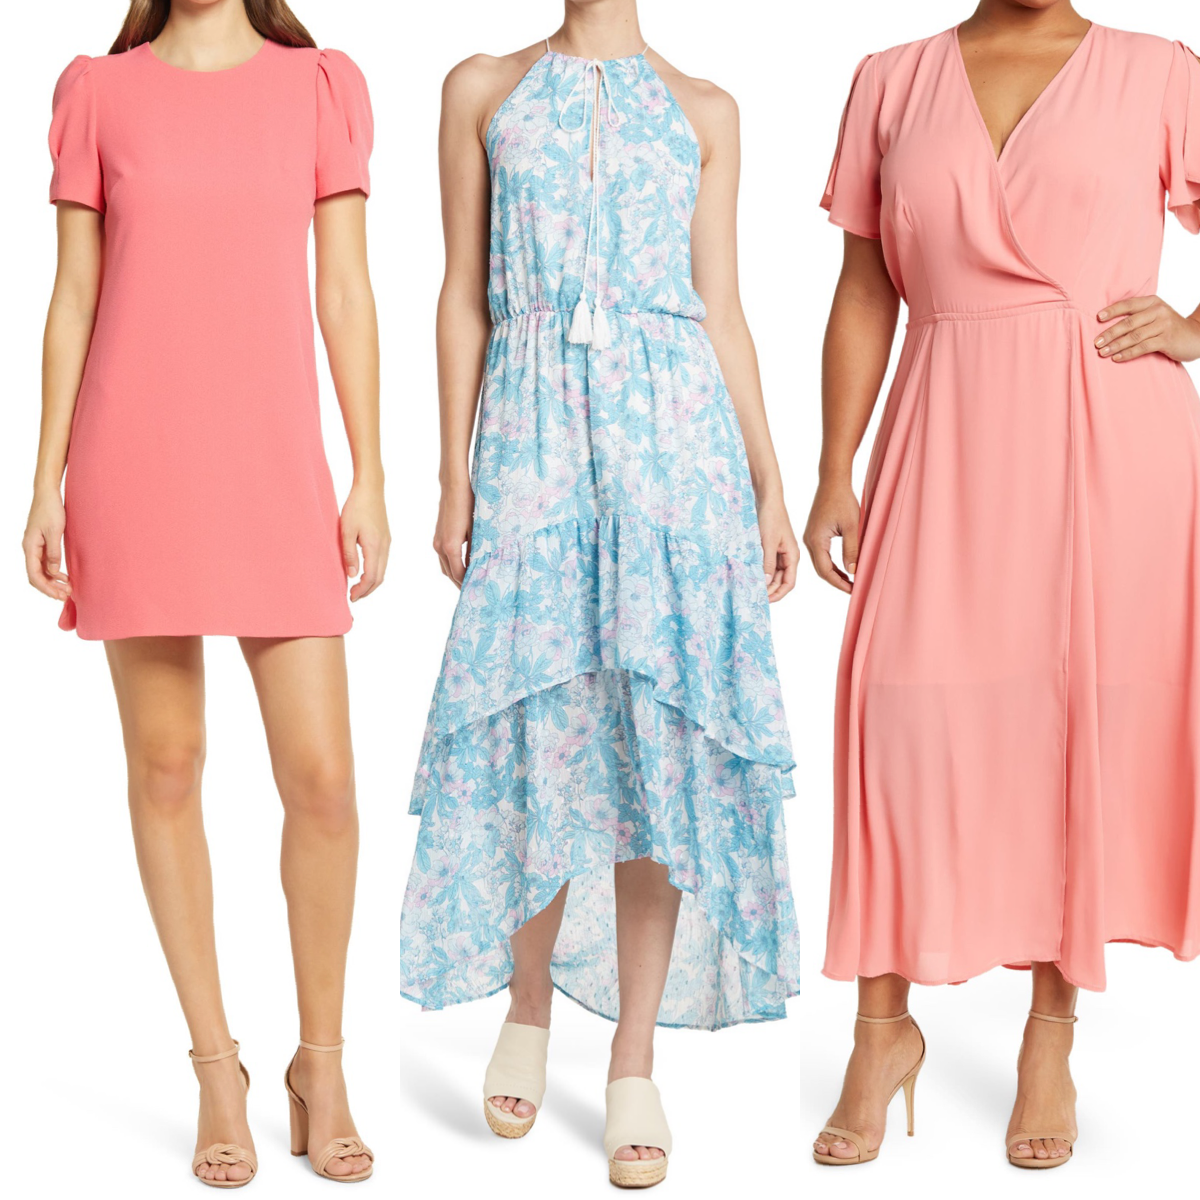 Dresses from the Nordstrom Spring Sale 2020 - Dress for the Wedding